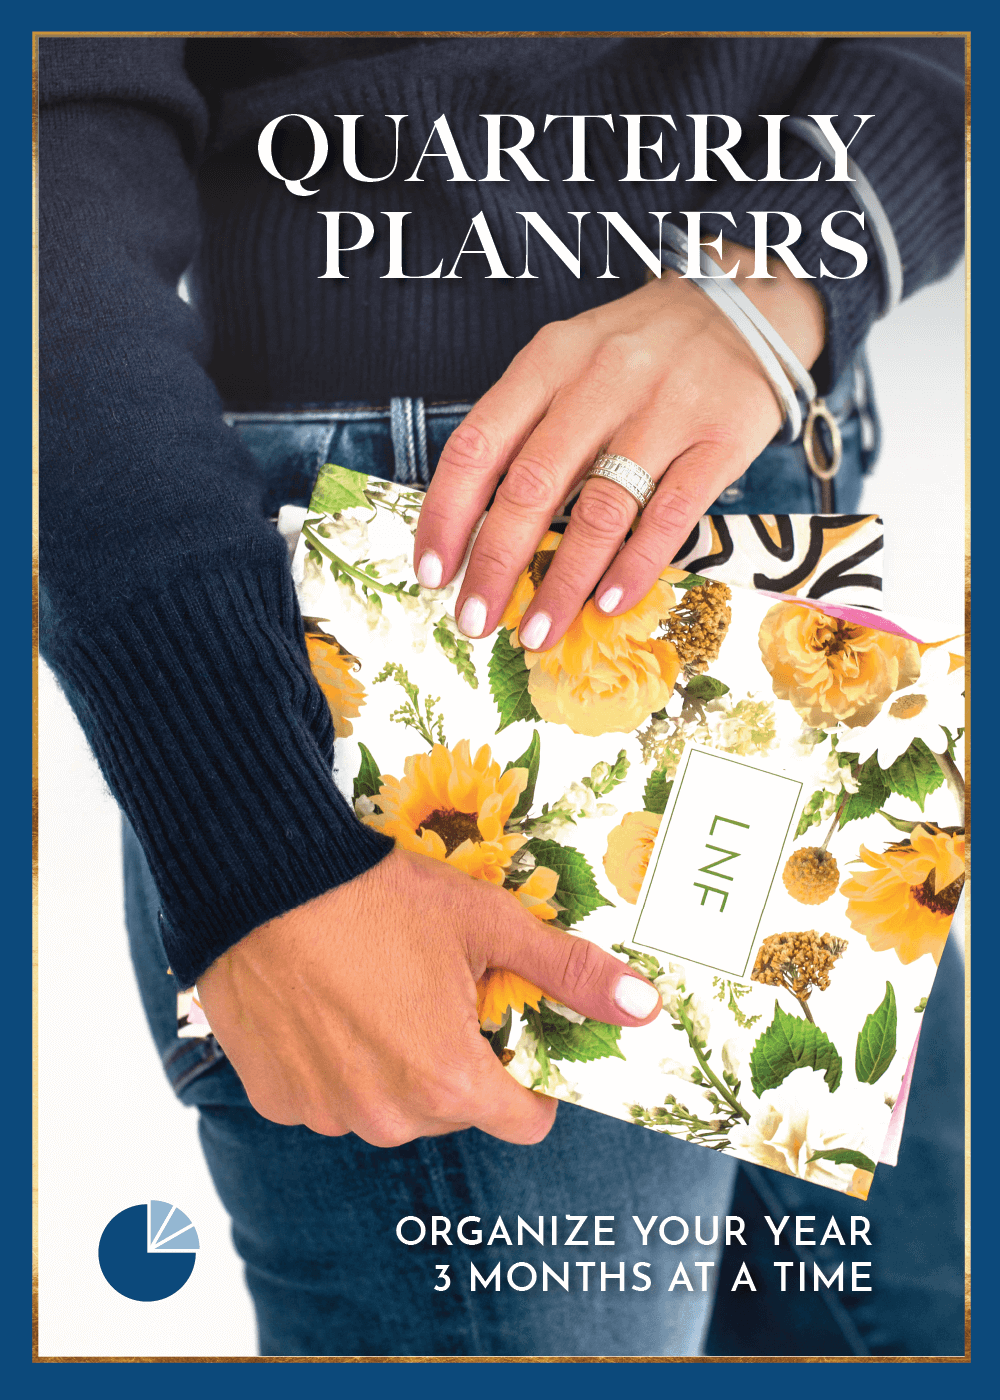 Prayer Changes Everything Prayer Journal – Designs by Planner Perfect